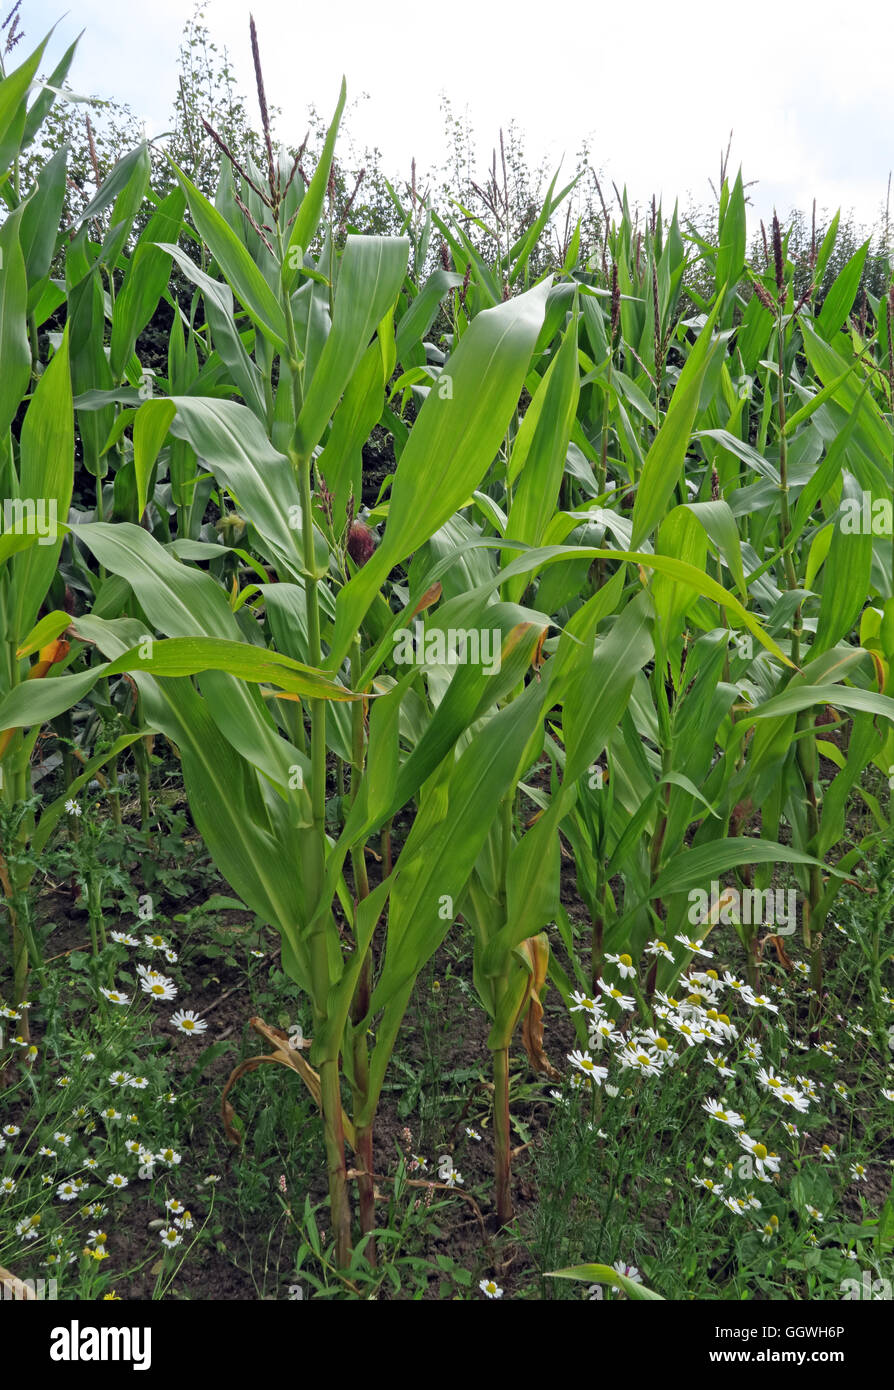 Fields of maize sweetcorn, growing in Hatton, Warrington, Cheshire, North West England, UK Stock Photo